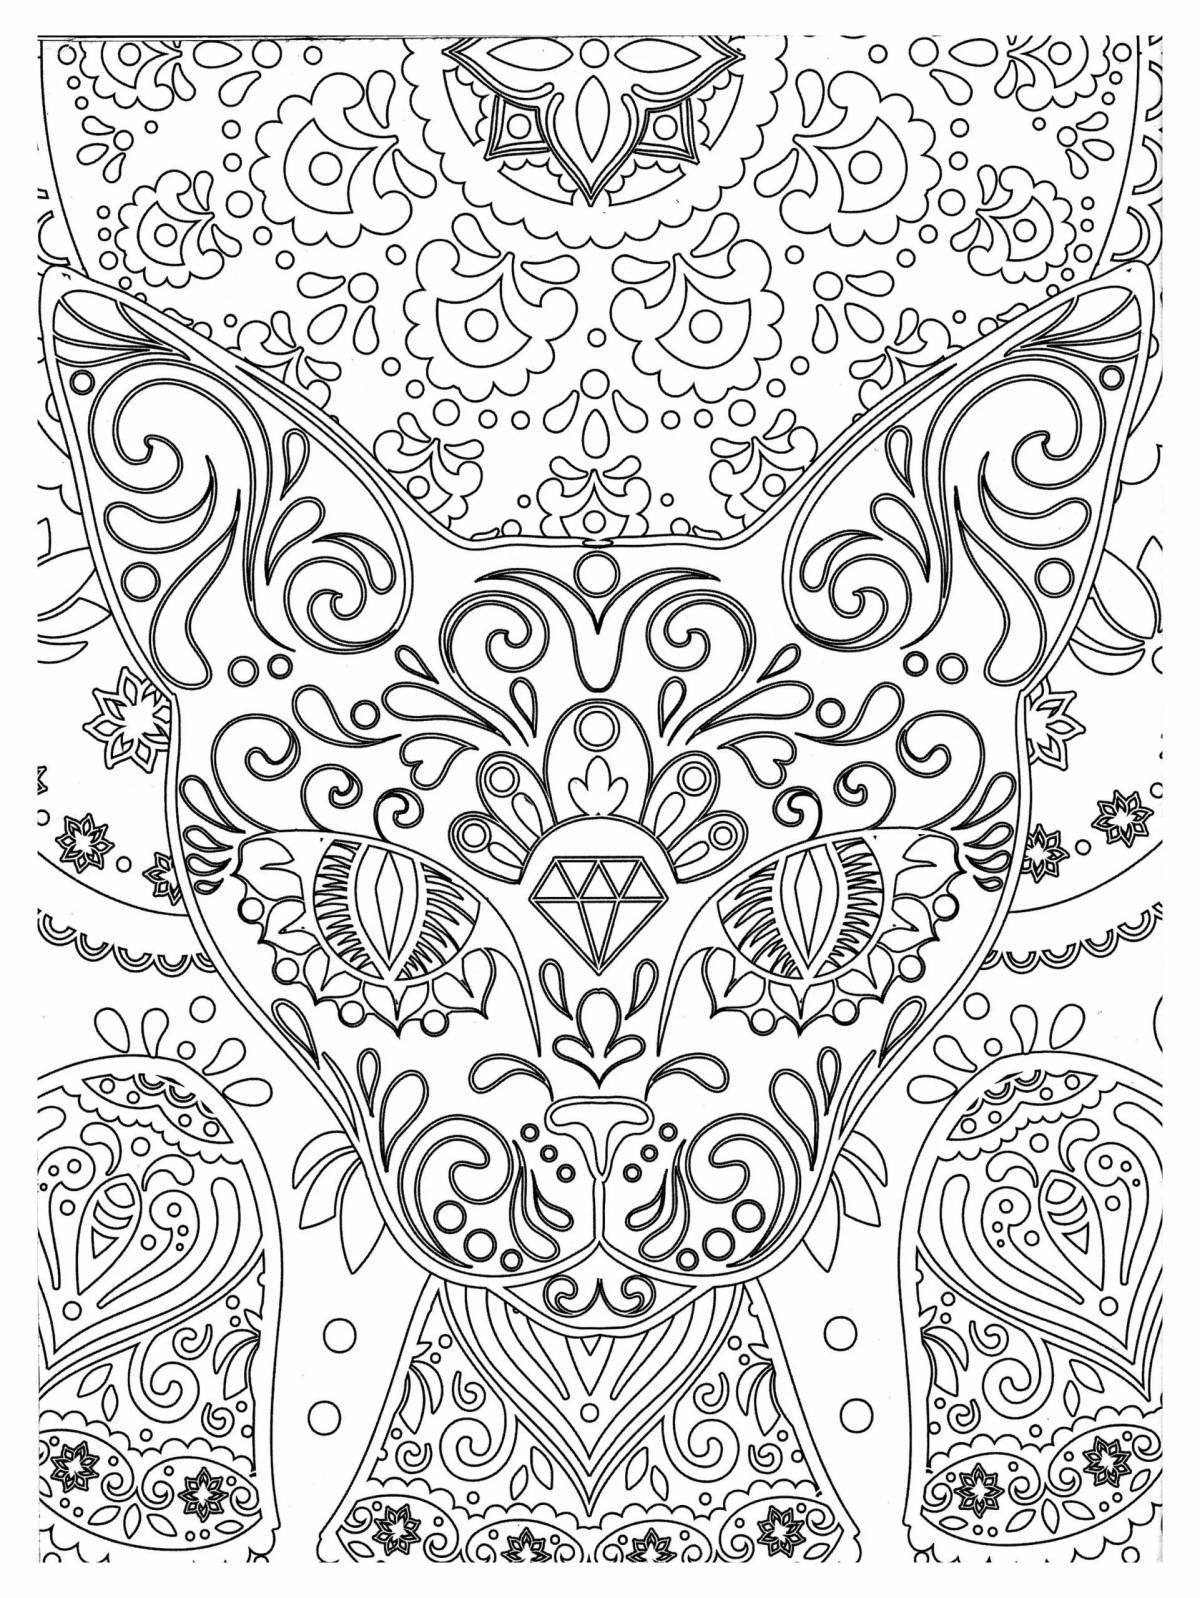 Antistress radiant coloring book